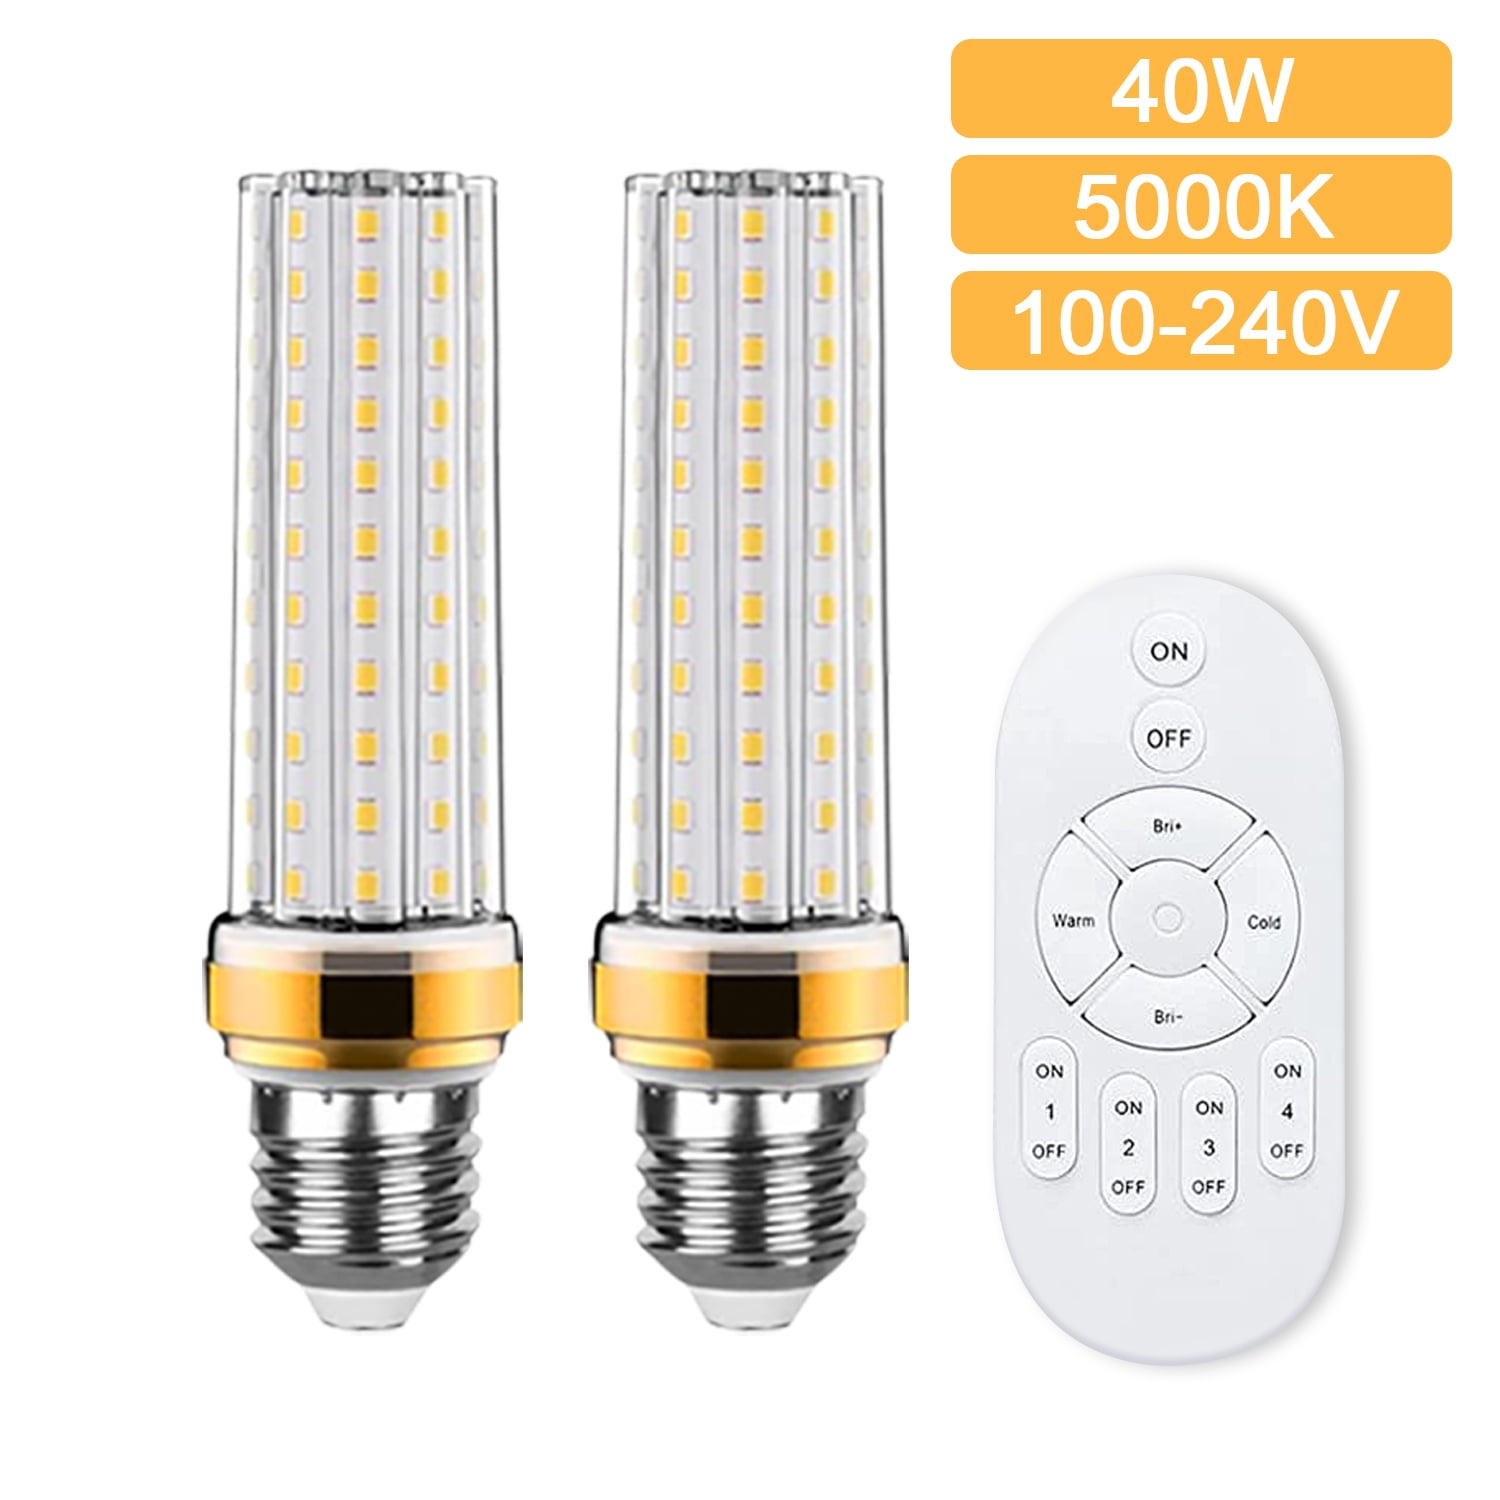 Corn Smart Led Light Bulb, 40W Bulbs 5000 Lumen,E27 Based Smart LED Light Dimmable 2.4GHz Wireless 3-Zone Remote Control, Dimmable & Color Temperature (2 bulb + Remote) Walmart.com